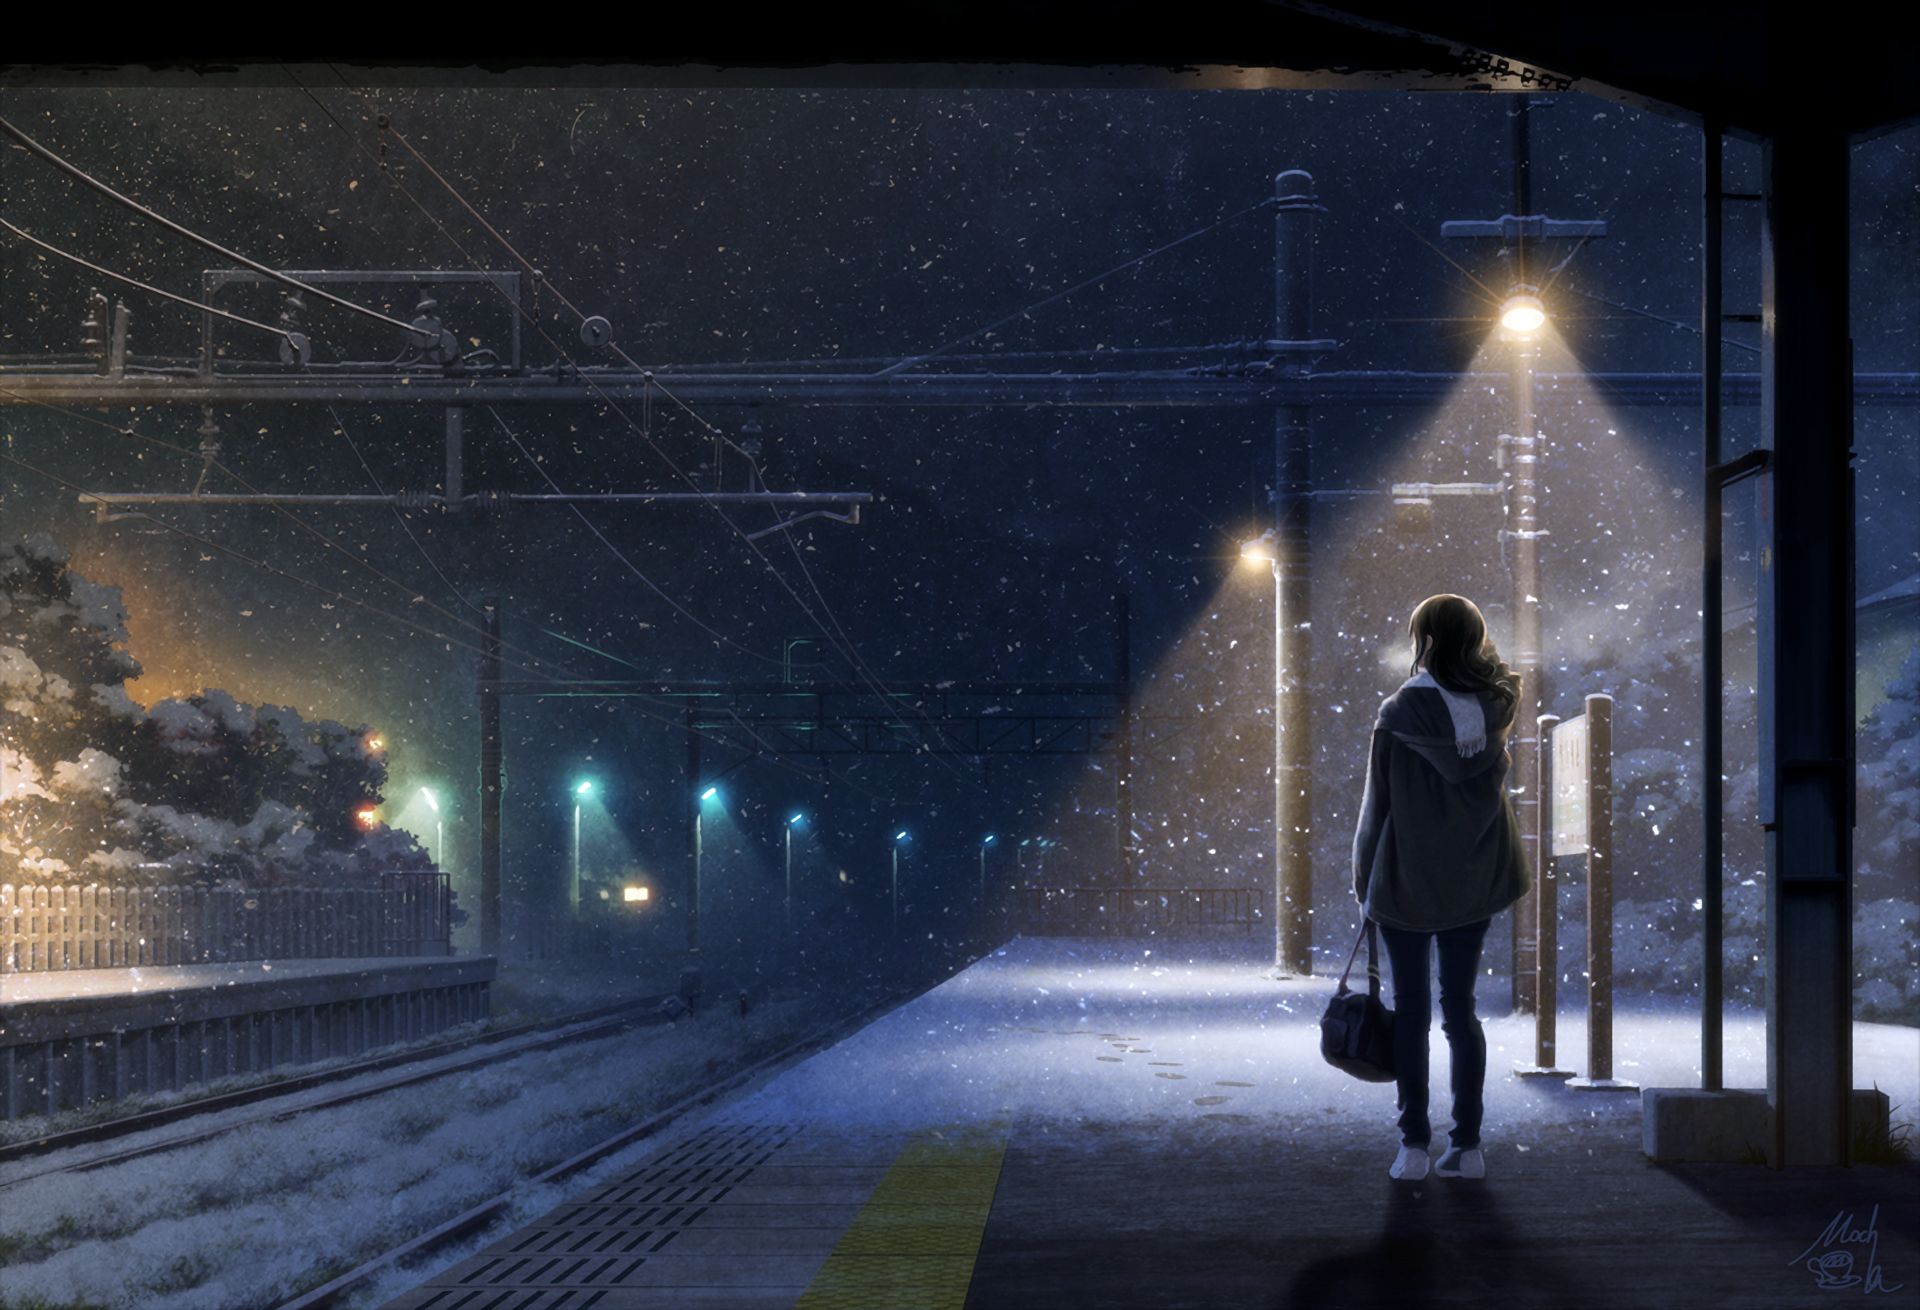 lost train station, anime style, studio ghibli | Stable Diffusion